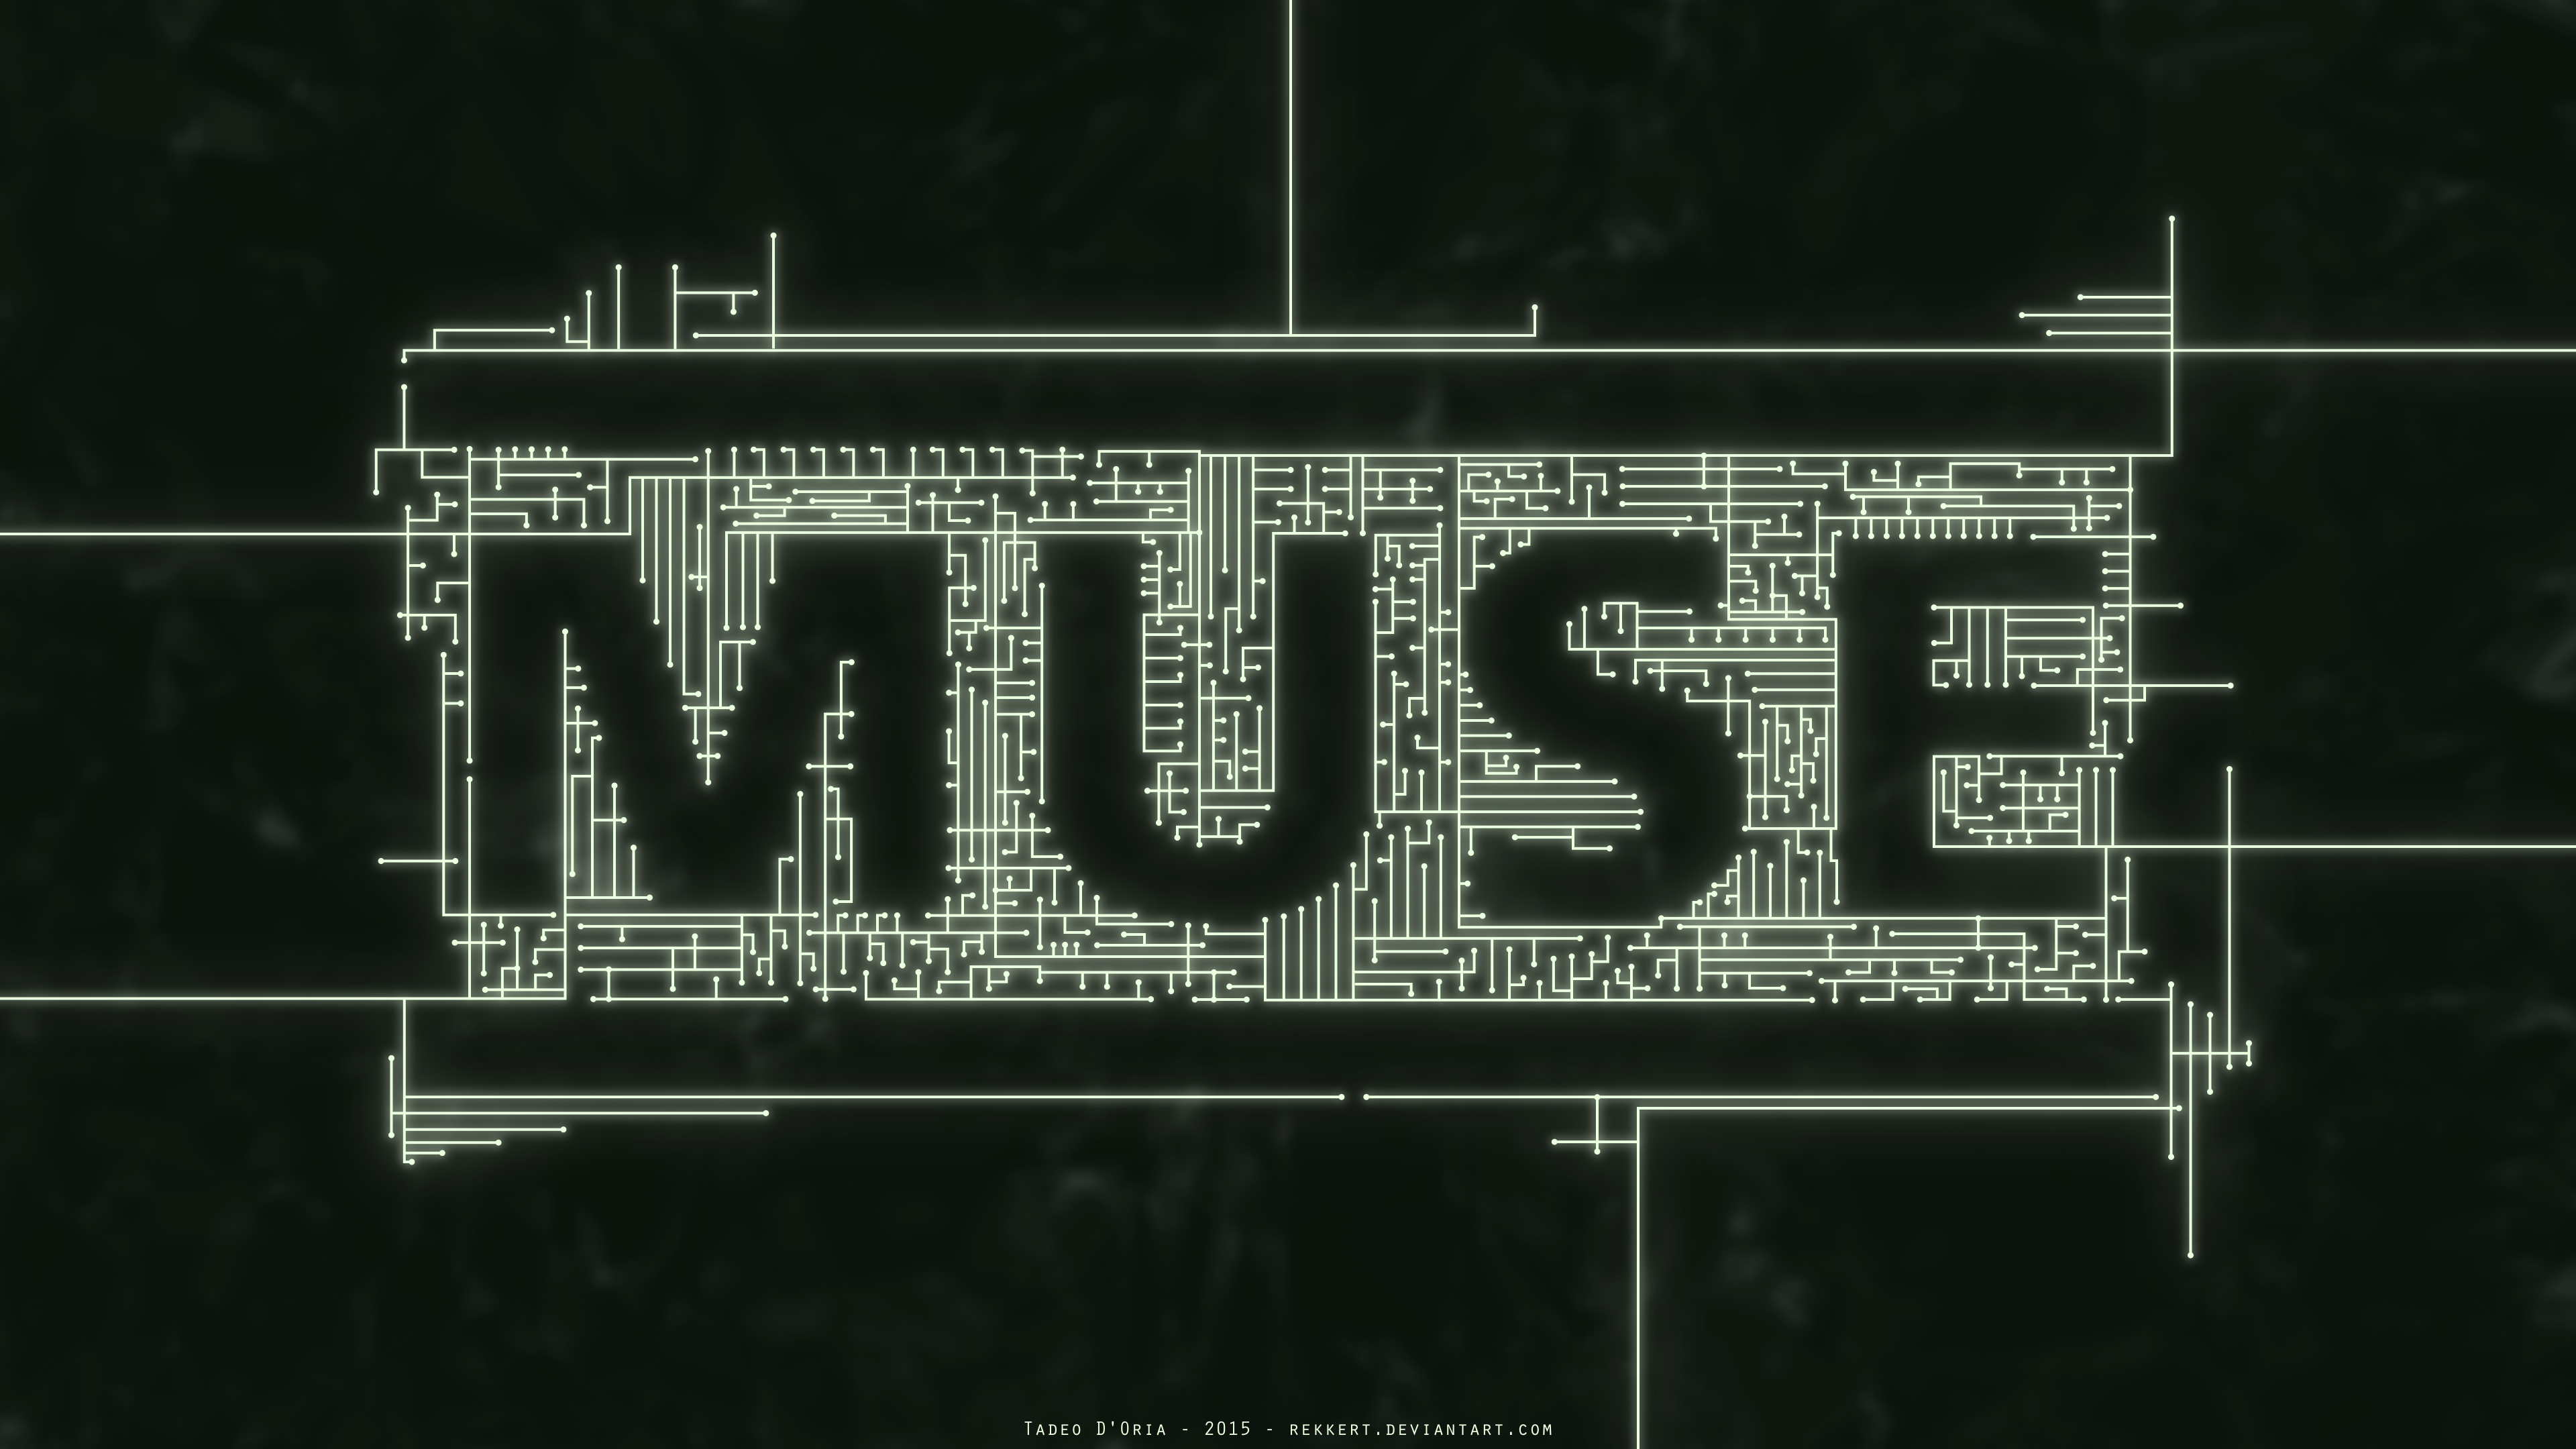 Muse Wallpapers